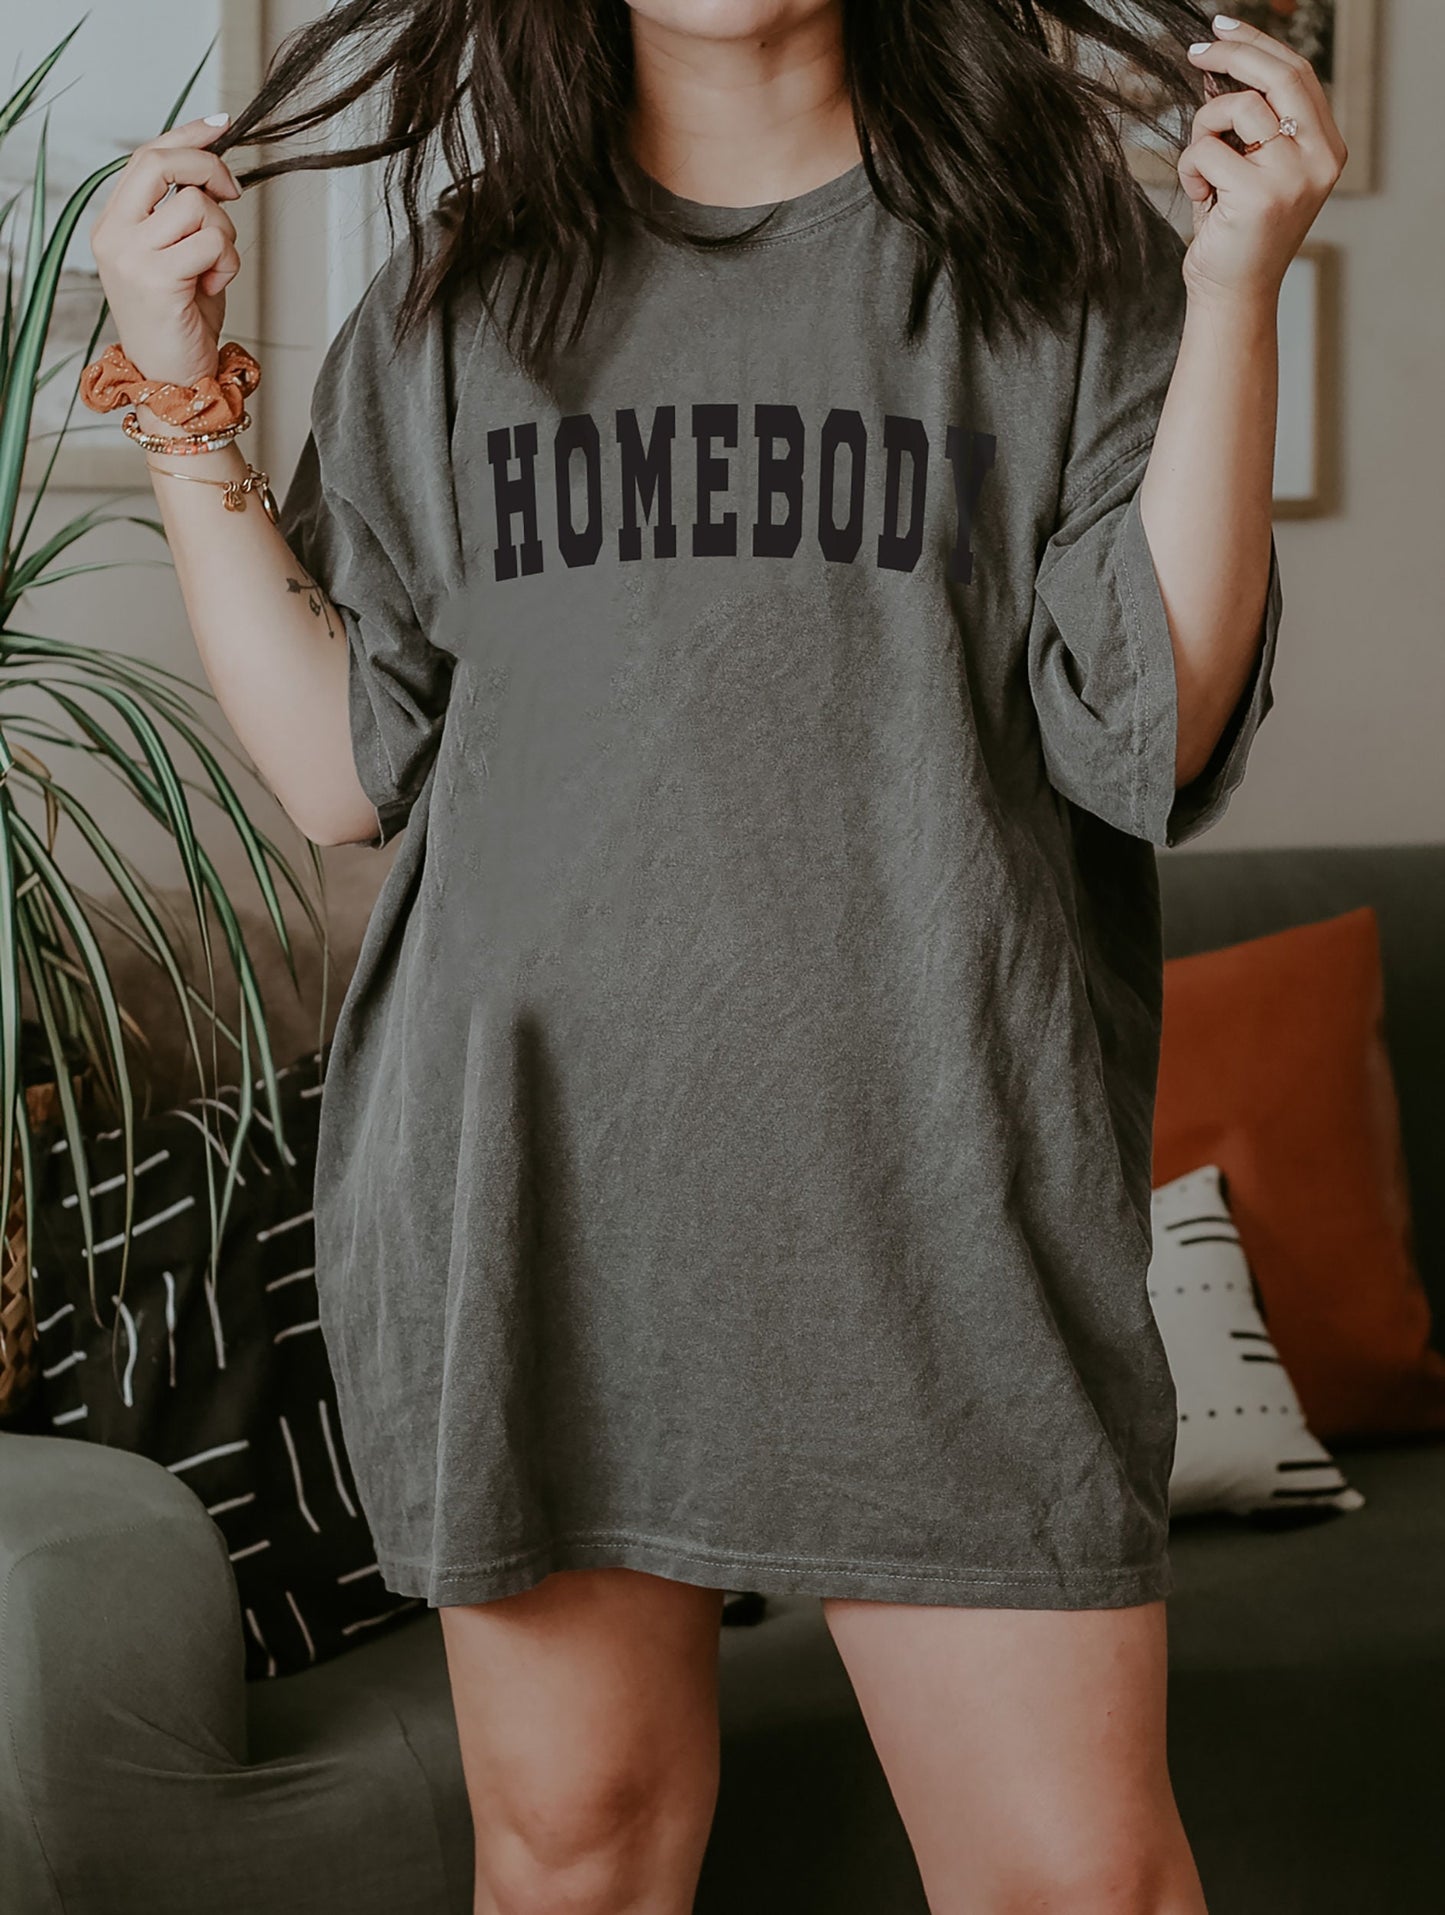 Homebody Shirt, Vintage shirt, Loungewear, Graphic Tee, Homebody, Stay at home, Work from home, Cozy shirt, Comfort Colors